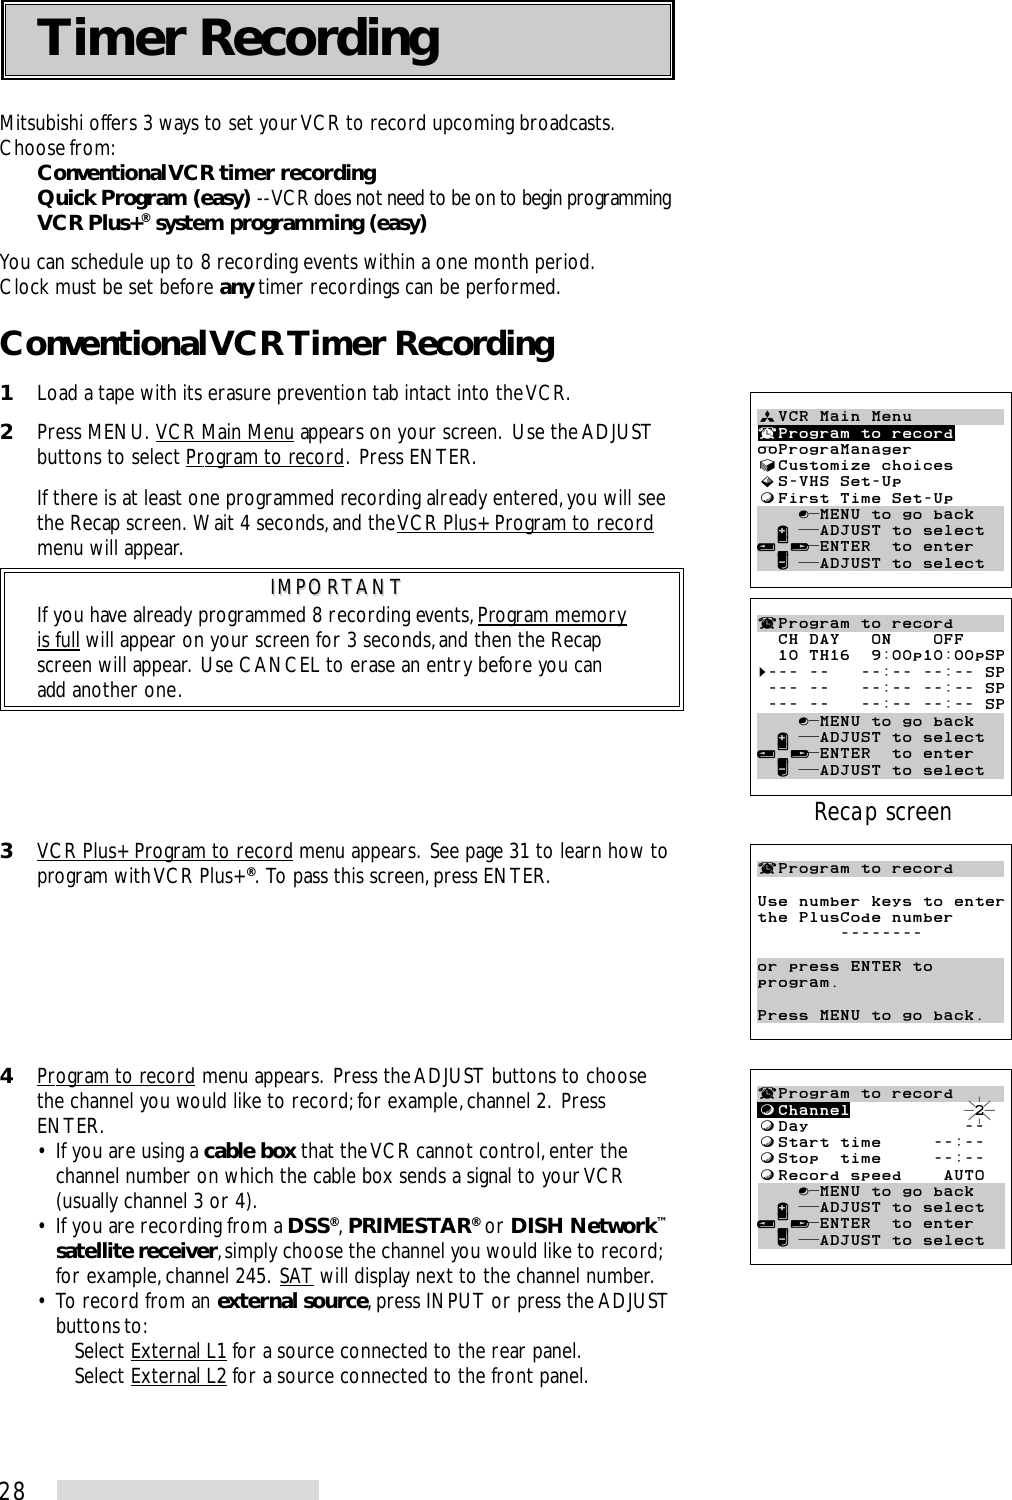 28Mitsubishi offers 3 ways to set your VCR to record upcoming broadcasts.Choose from:Conventional VCR timer recordingQuick Program (easy) -- VCR does not need to be on to begin programmingVCR Plus+® system programming (easy)You can schedule up to 8 recording events within a one month period.Clock must be set before any timer recordings can be performed.Conventional VCR Timer Recording1Load a tape with its erasure prevention tab intact into the VCR.2Press MENU.  VCR Main Menu appears on your screen.  Use the ADJUSTbuttons to select Program to record.  Press ENTER.If there is at least one programmed recording already entered, you will seethe Recap screen.  Wait 4 seconds, and the VCR Plus+ Program to recordmenu will appear.IMPORTANTIMPORTANTIf you have already programmed 8 recording events, Program memoryis full will appear on your screen for 3 seconds, and then the Recapscreen will appear.  Use CANCEL to erase an entry before you canadd another one.3VCR Plus+ Program to record menu appears.  See page 31 to learn how toprogram with VCR Plus+®.  To pass this screen, press ENTER.4Program to record menu appears.  Press the ADJUST buttons to choosethe channel you would like to record; for example, channel 2.  PressENTER.• If you are using a cable box that the VCR cannot control, enter thechannel number on which the cable box sends a signal to your VCR(usually channel 3 or 4).• If you are recording from a DSS®, PRIMESTAR® or DISH Network™satellite receiver, simply choose the channel you would like to record;for example, channel 245.  SAT will display next to the channel number.• To record from an external source, press INPUT or press the ADJUSTbuttons to:Select External L1 for a source connected to the rear panel.Select External L2 for a source connected to the front panel.ªVCR Main Menu¬Program to recordPrograManager√Customize choices»S-VHS Set-UpƒFirst Time Set-Up    ∫πMENU to go back  ∂ ππADJUST to select≤¥≥πENTER  to enter  ∑ ππADJUST to select¬Program to recordUse number keys to enterthe PlusCode number        --------or press ENTER toprogram.Press MENU to go back.¬Program to recordƒChannel            2ƒDay               --ƒStart time     --:--ƒStop  time     --:--ƒRecord speed    AUTO    ∫πMENU to go back  ∂ ππADJUST to select≤¥≥πENTER  to enter  ∑ ππADJUST to select¬Program to record  CH DAY   ON    OFF  10 TH16  9:00p10:00pSP§--- --   --:-- --:-- SP --- --   --:-- --:-- SP --- --   --:-- --:-- SP    ∫πMENU to go back  ∂ ππADJUST to select≤¥≥πENTER  to enter  ∑ ππADJUST to selectRecap screenTimer Recording